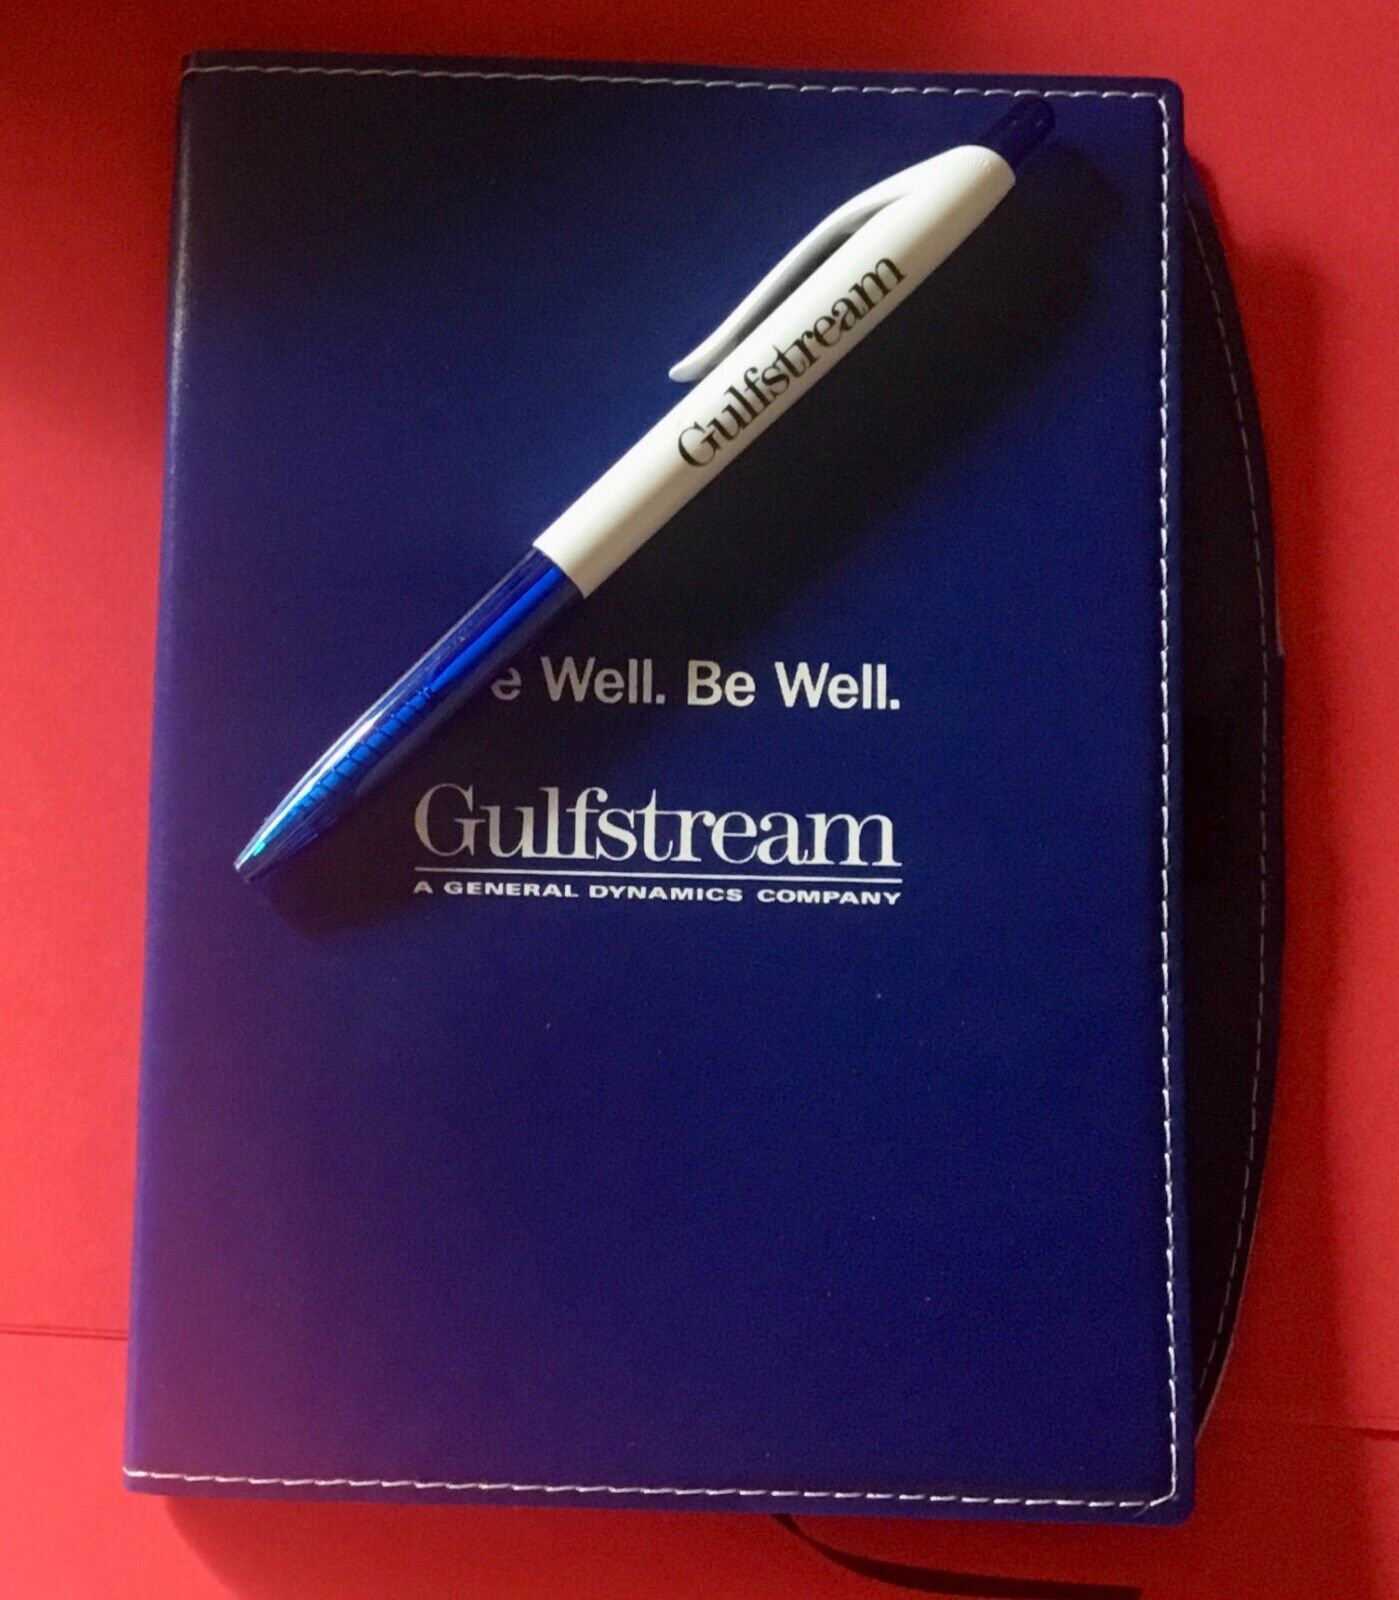 NEW GULFSTREAM GENERAL DYNAMICS 6” x 7” “LIVE WELL BE WELL” NOTE PAD W/PEN